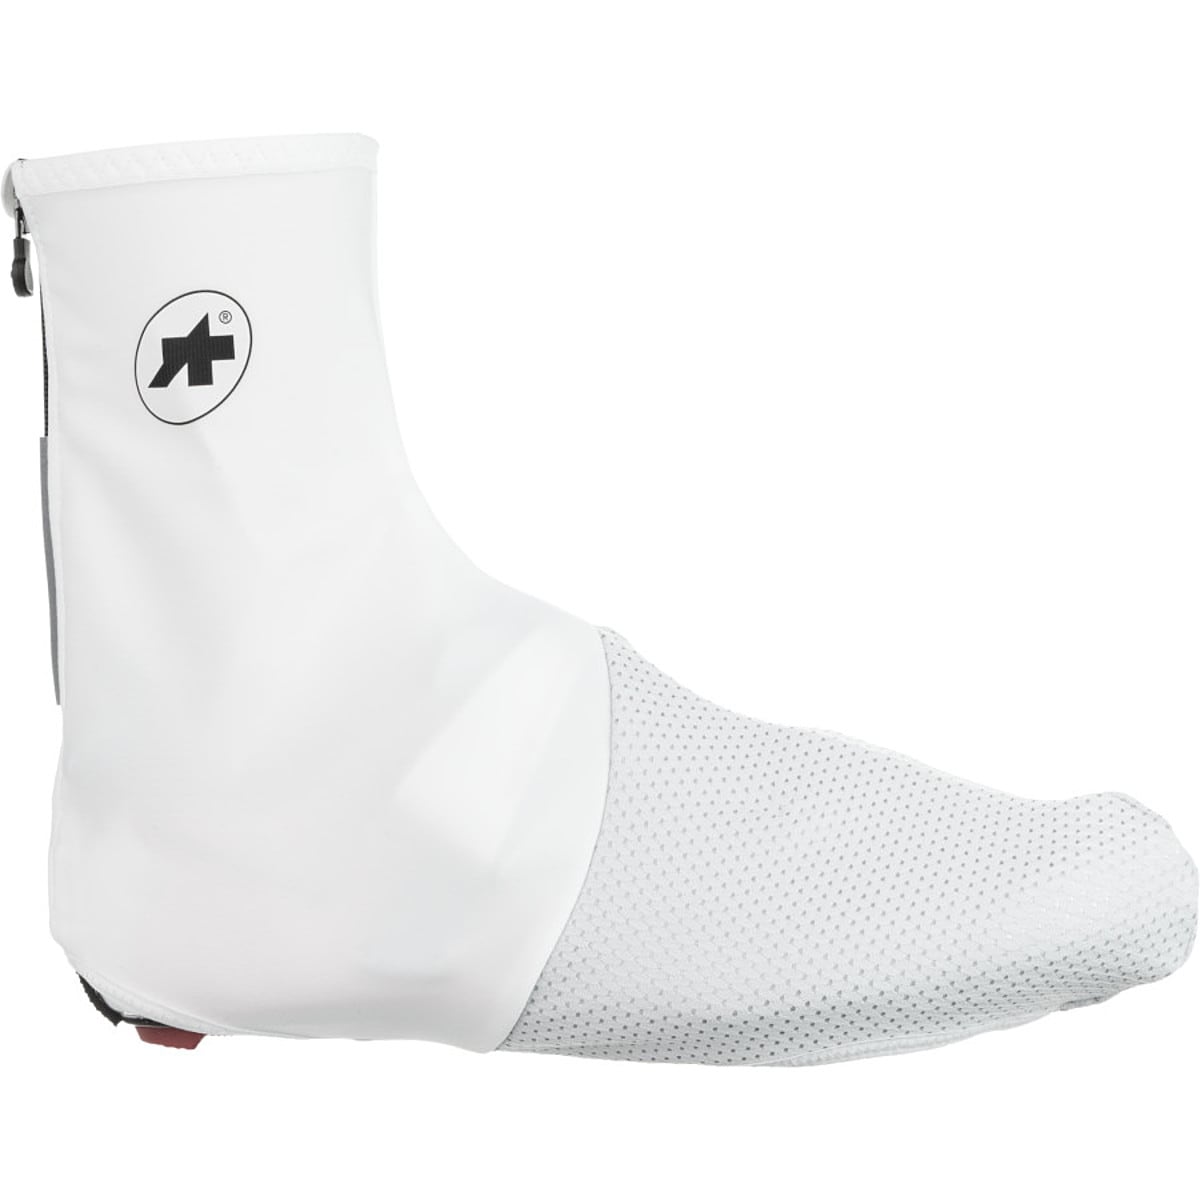 Assos thermoBooties7 Shoe Covers